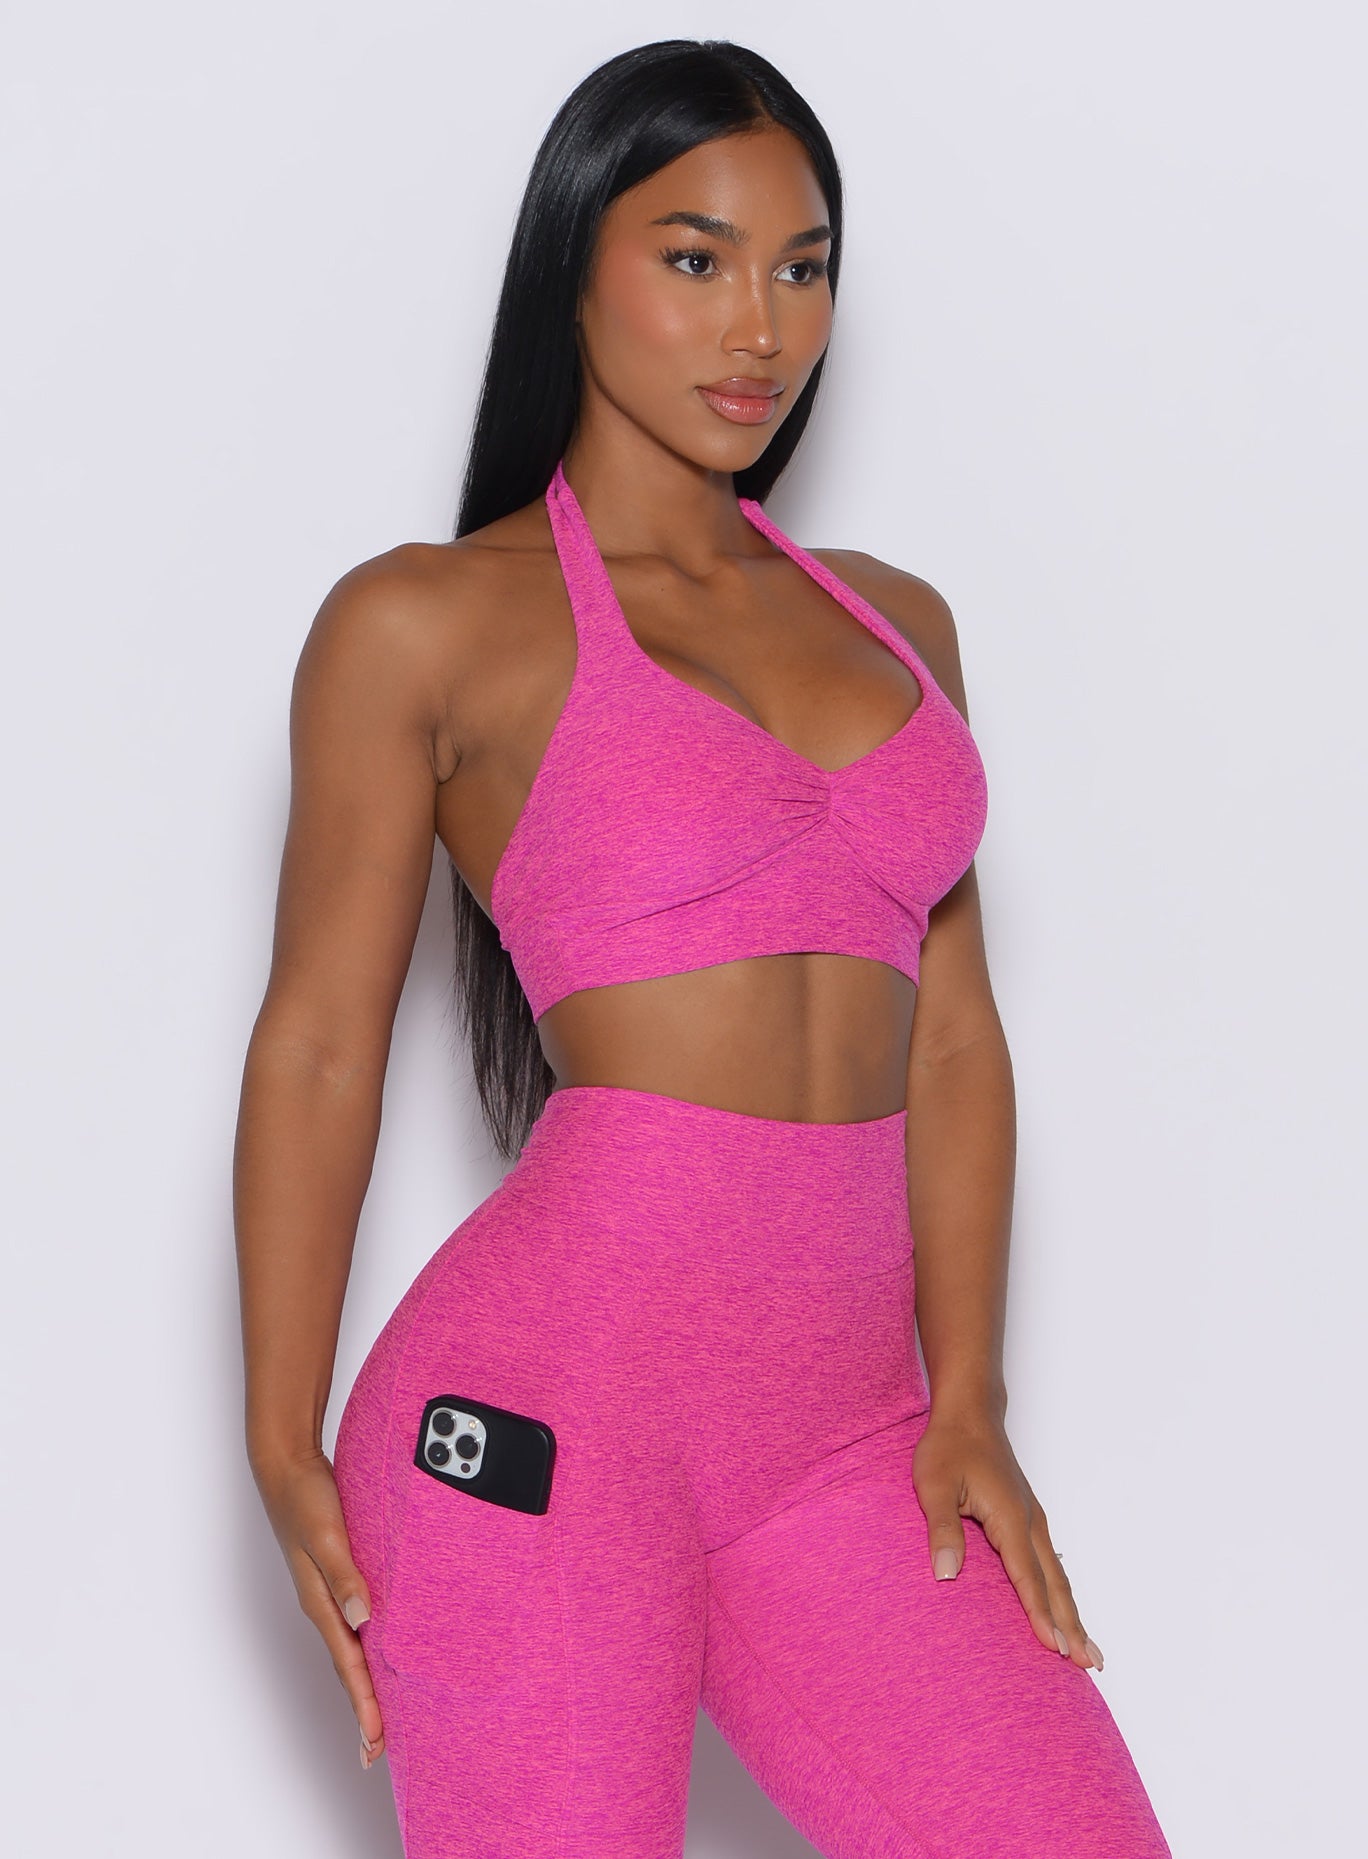 right side profile view of a model wearing our backless bra in Neon Pink Sorbet color along with the matching high waist leggings